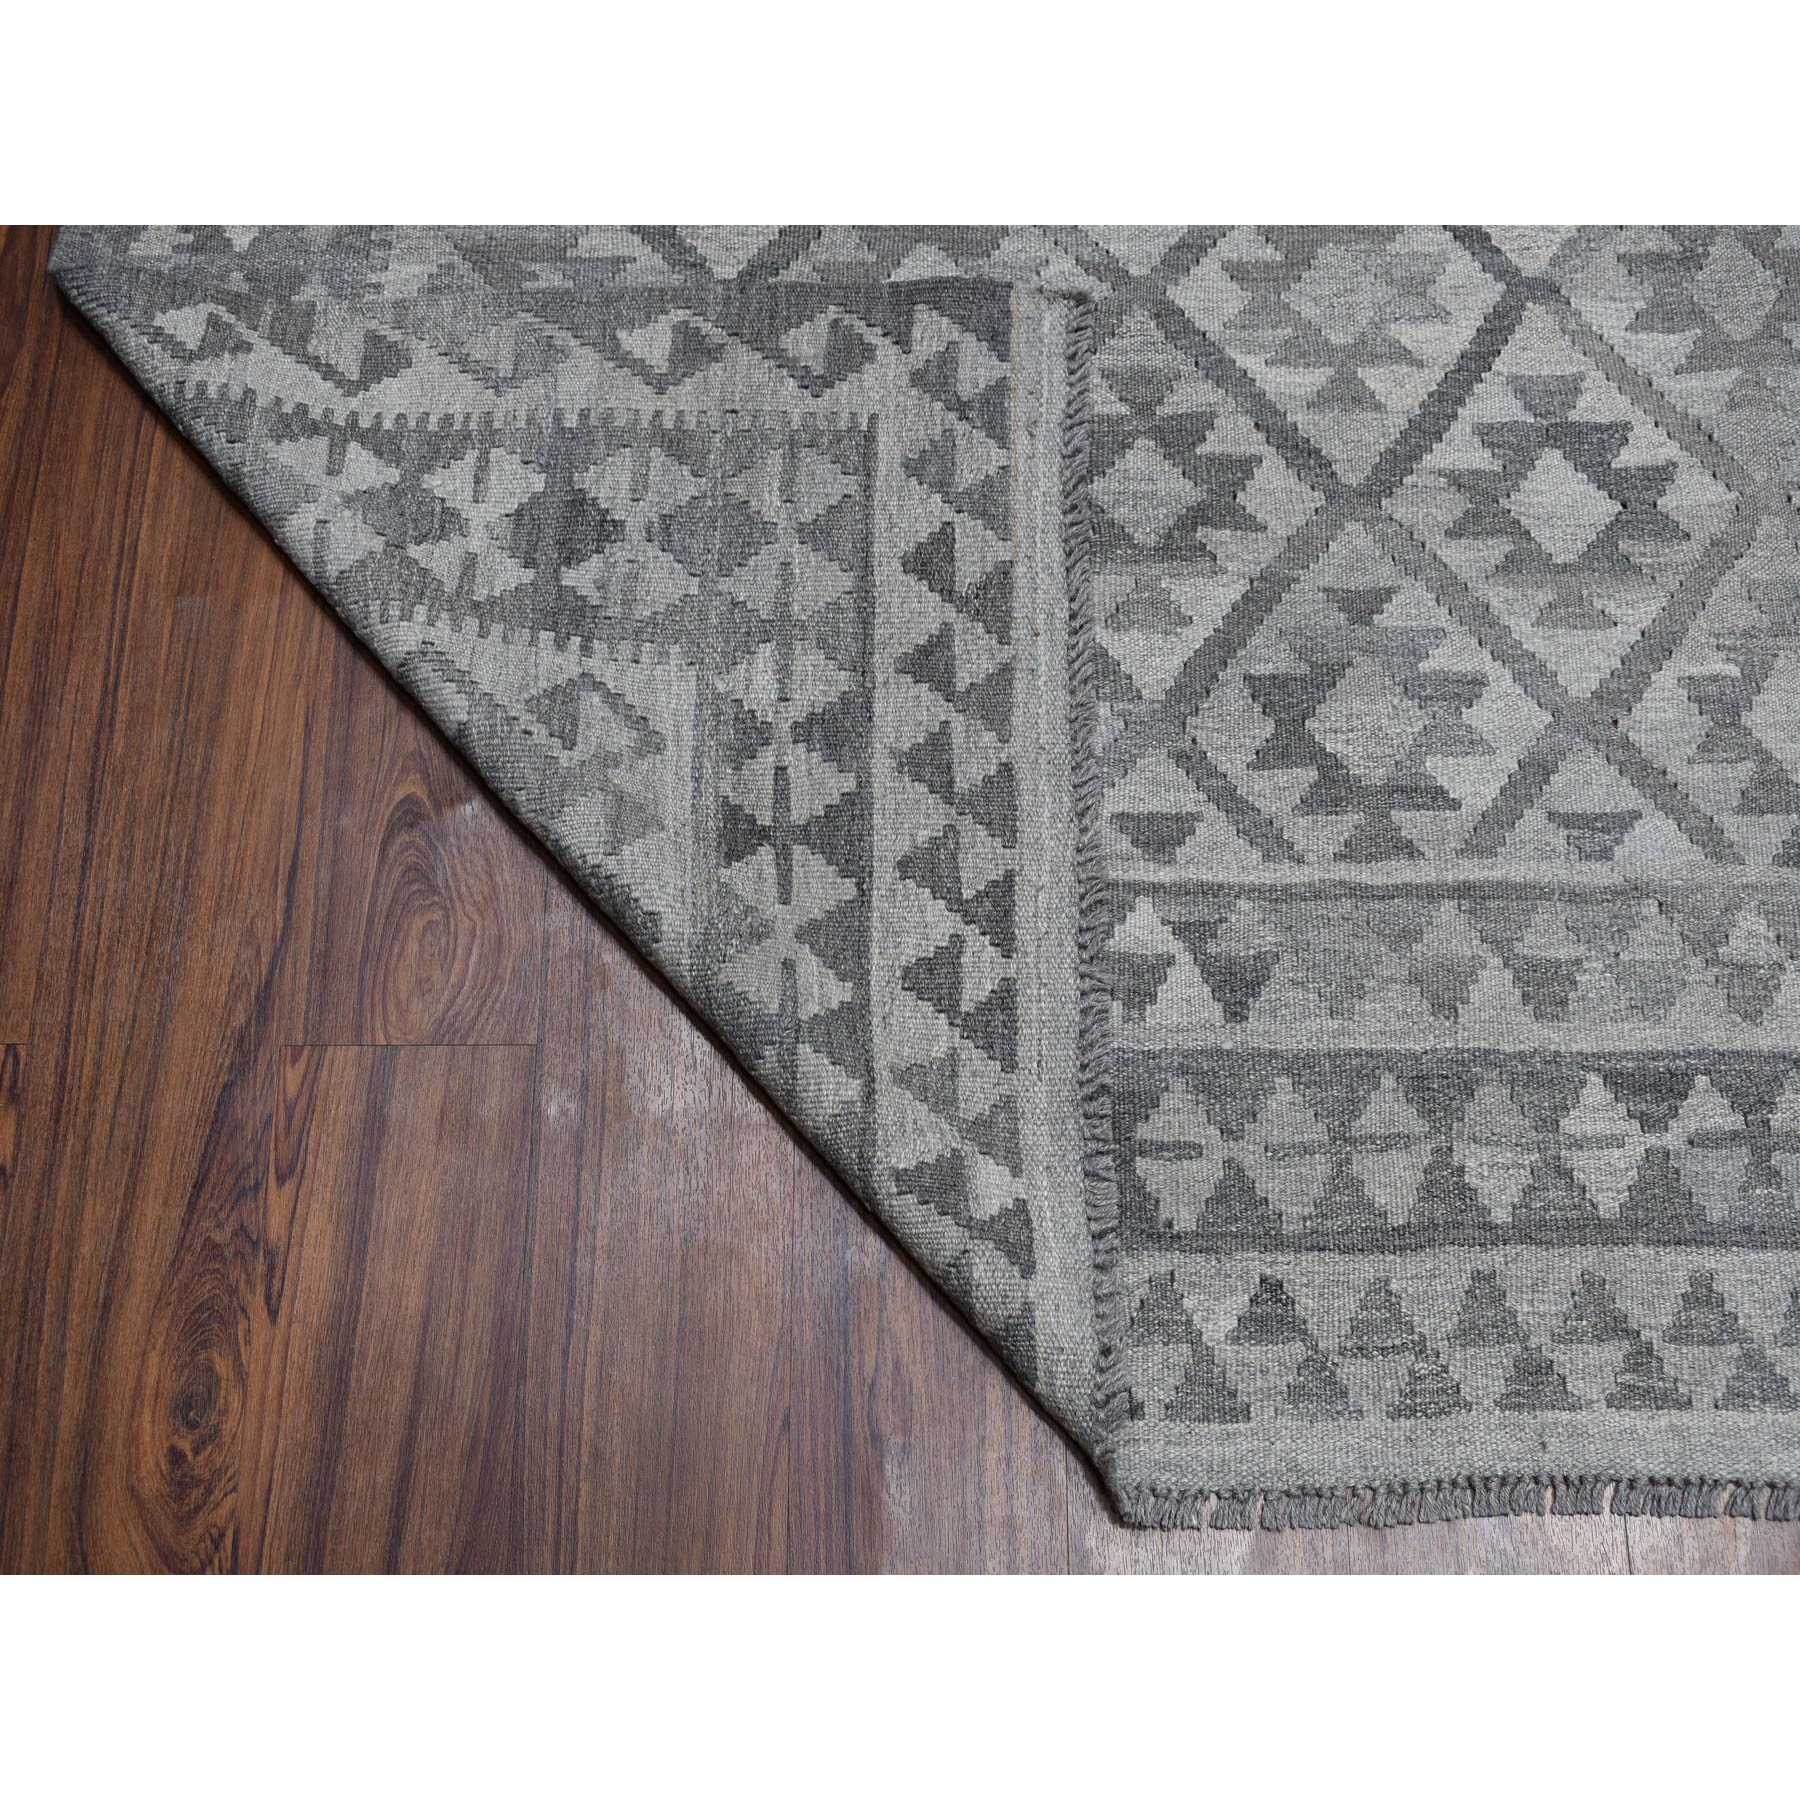 8-3 x11-3  Undyed Natural Wool Afghan Kilim Reversible Hand Woven Oriental Rug 